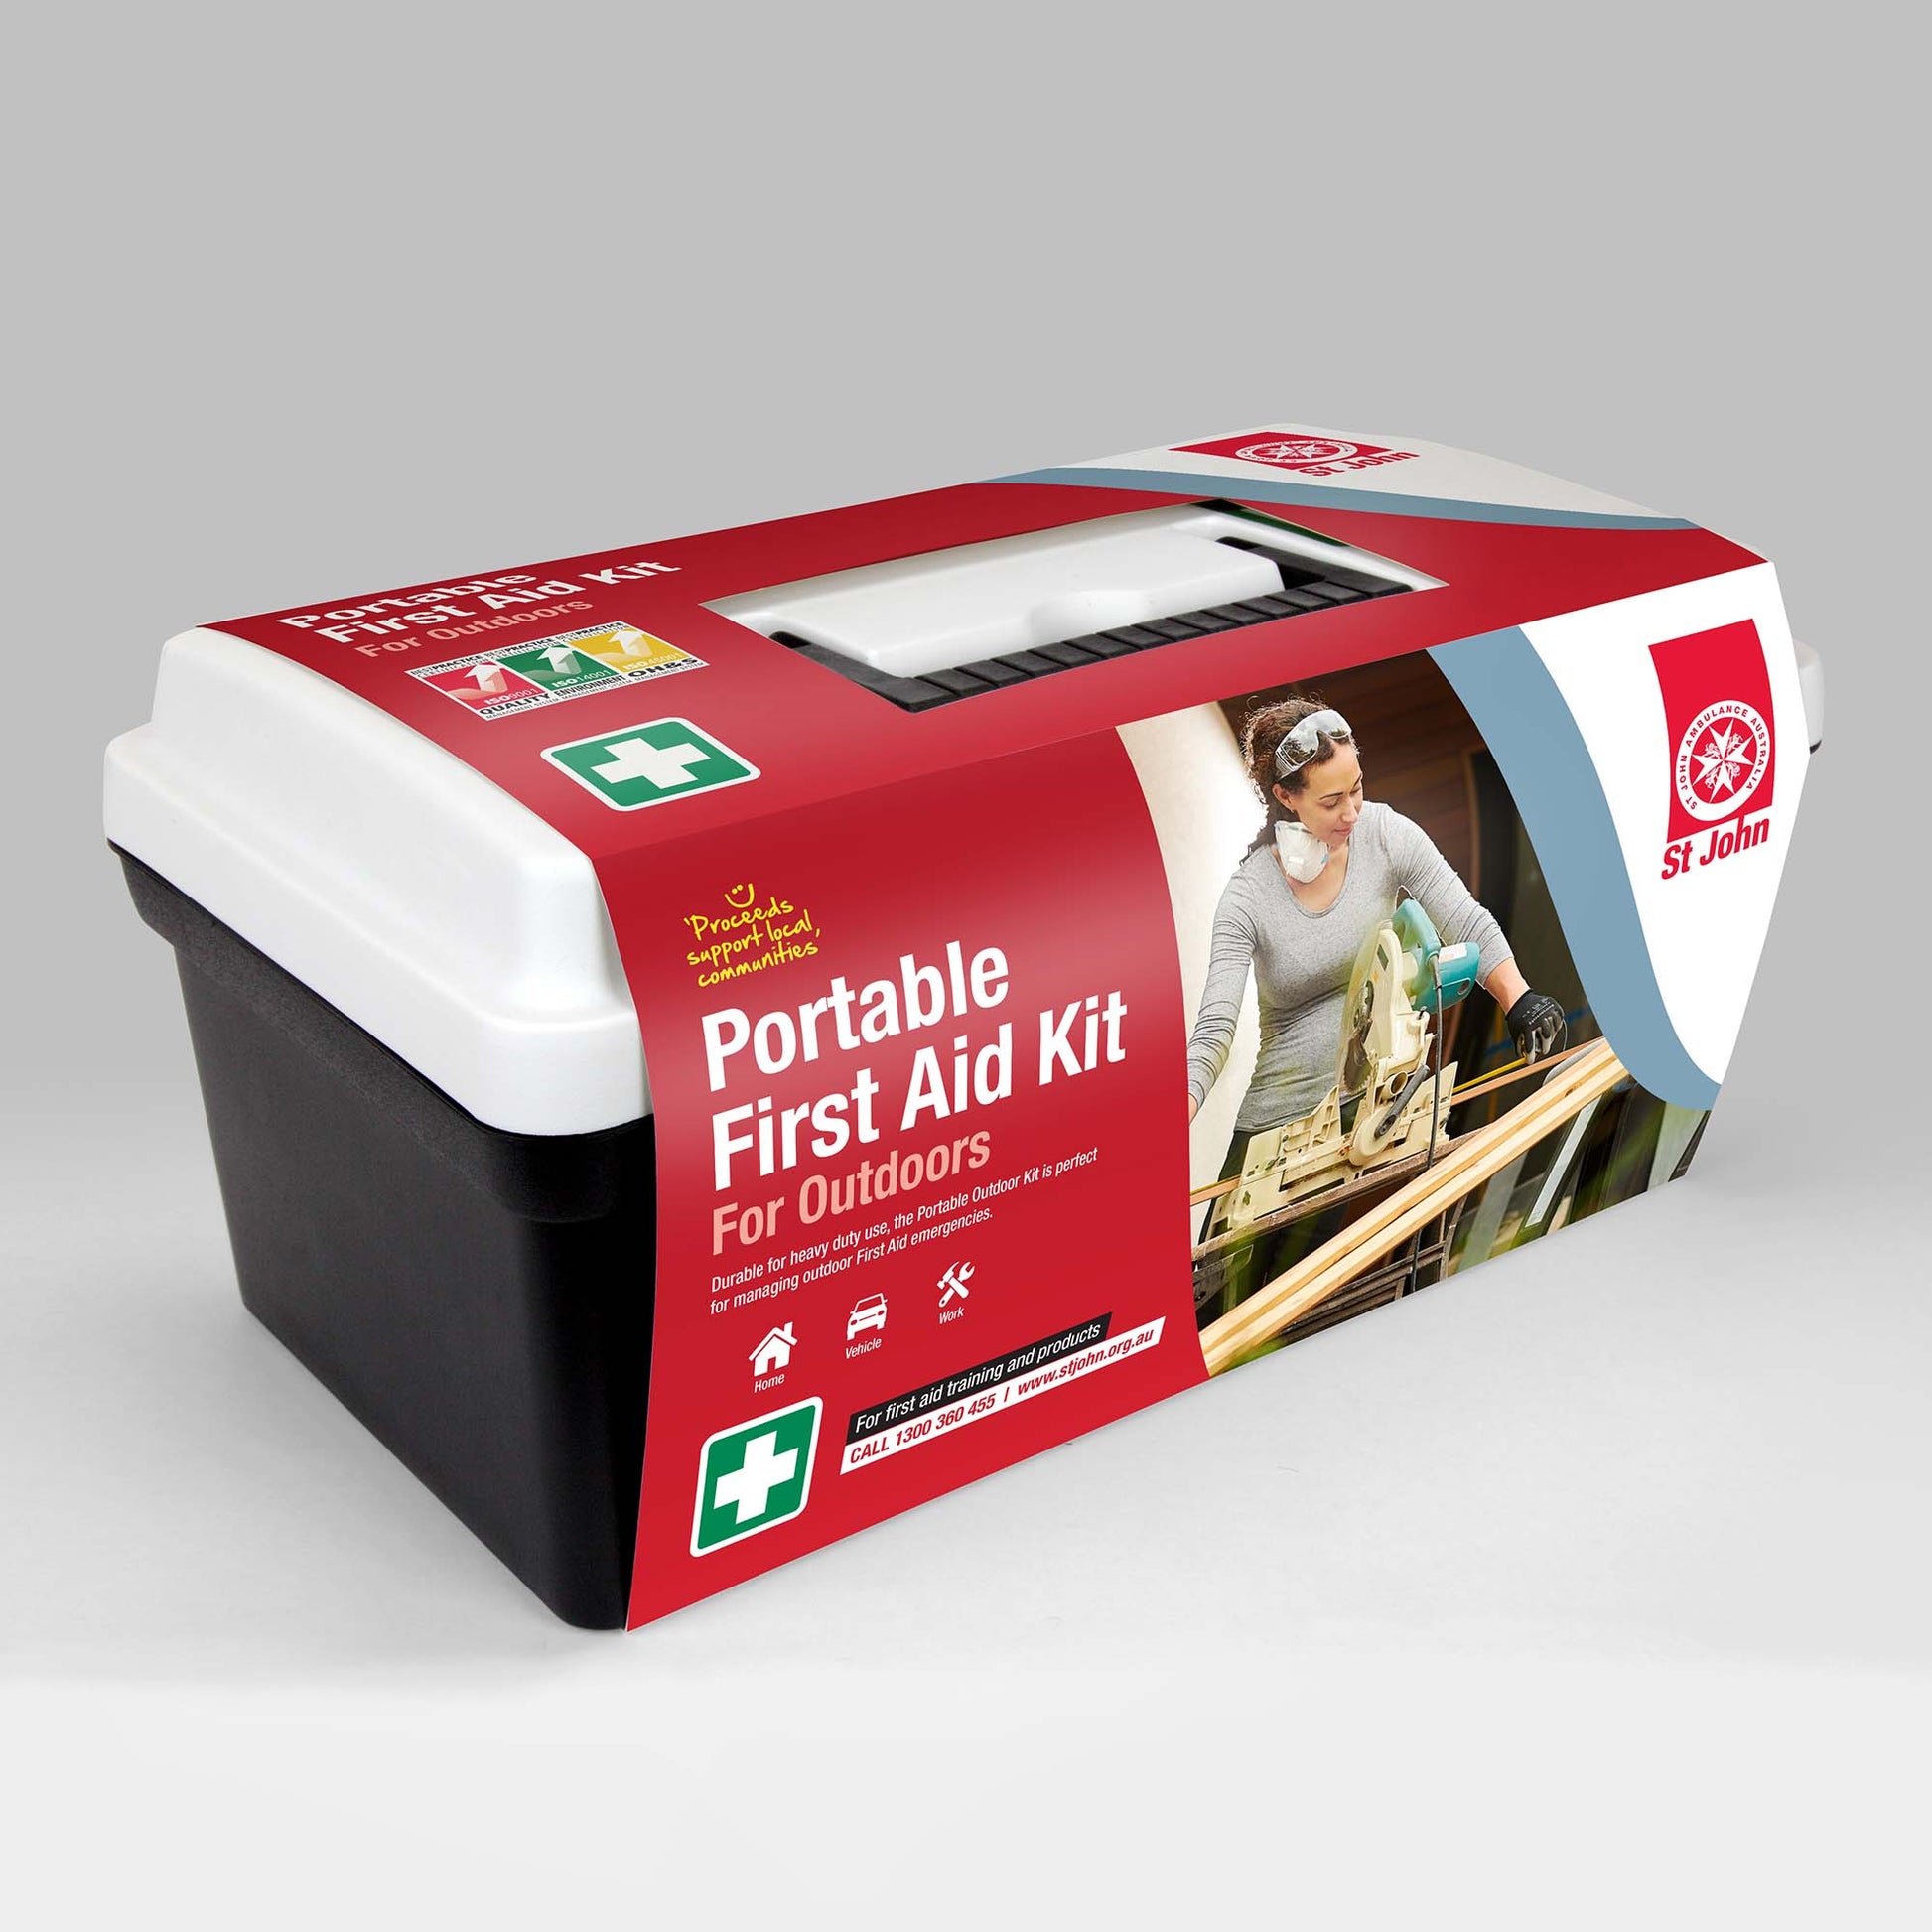 Portable First Aid Kit for Outdoors – St John Ambulance National